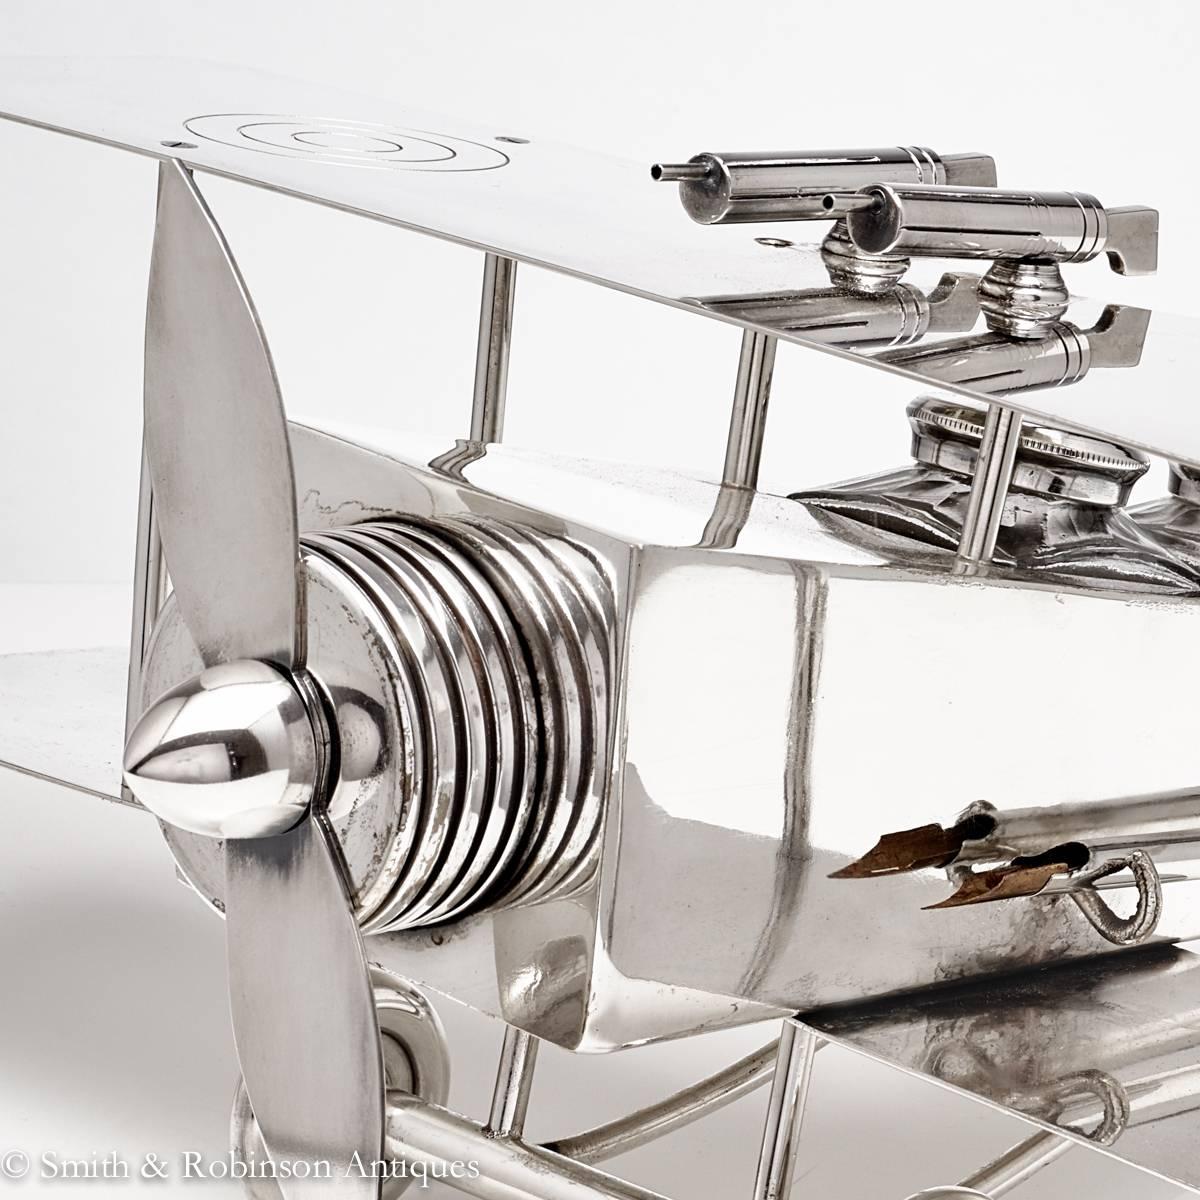 A large and very rare Bi-Plane desk companion piece by makers F. Reichenberg, Germany, circa 1920-1925.

Crafted in silver plated metal, the fuselage 'cockpits' containing a pair of glass and silver-plated inkwells, with dip pen and retaining